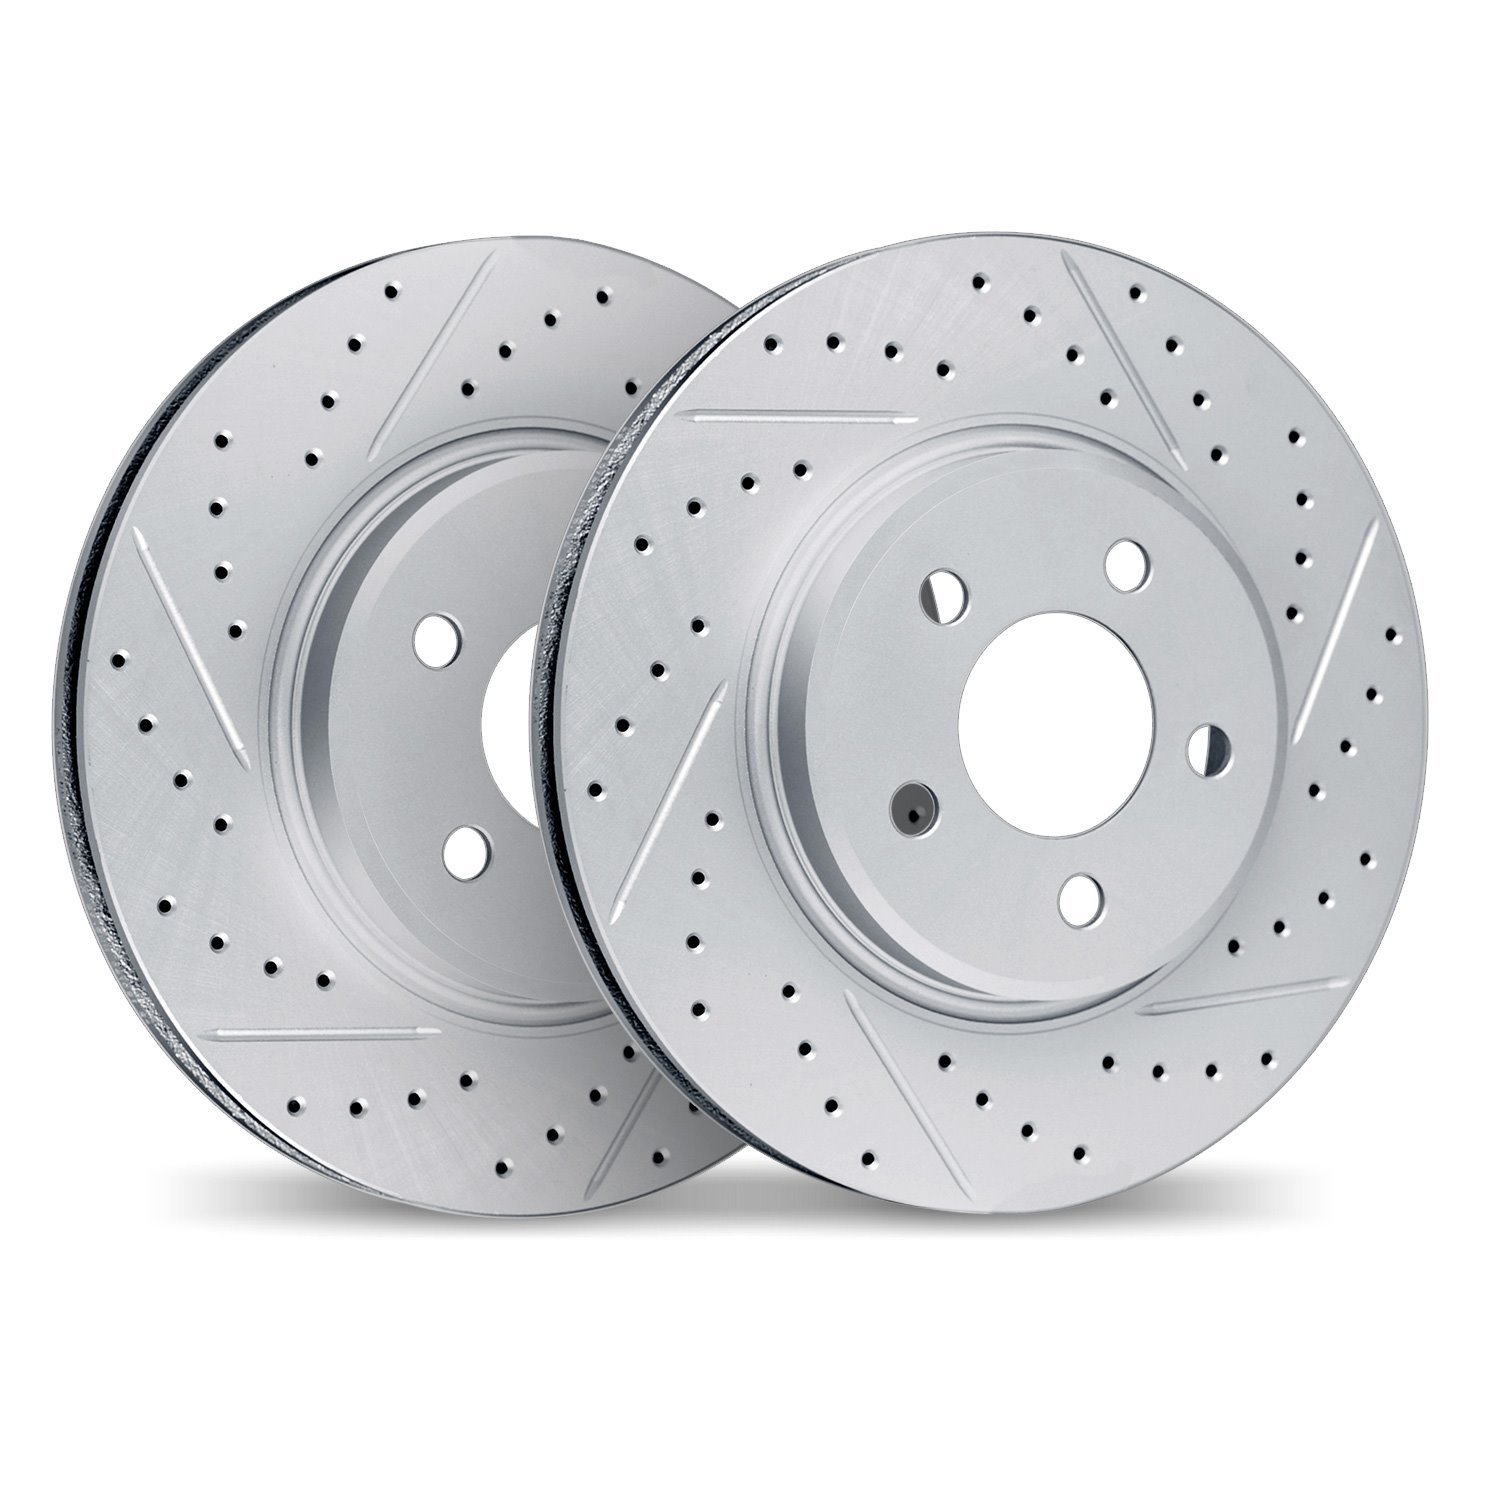 2002-11030 Geoperformance Drilled/Slotted Brake Rotors, Fits Select Land Rover, Position: Rear